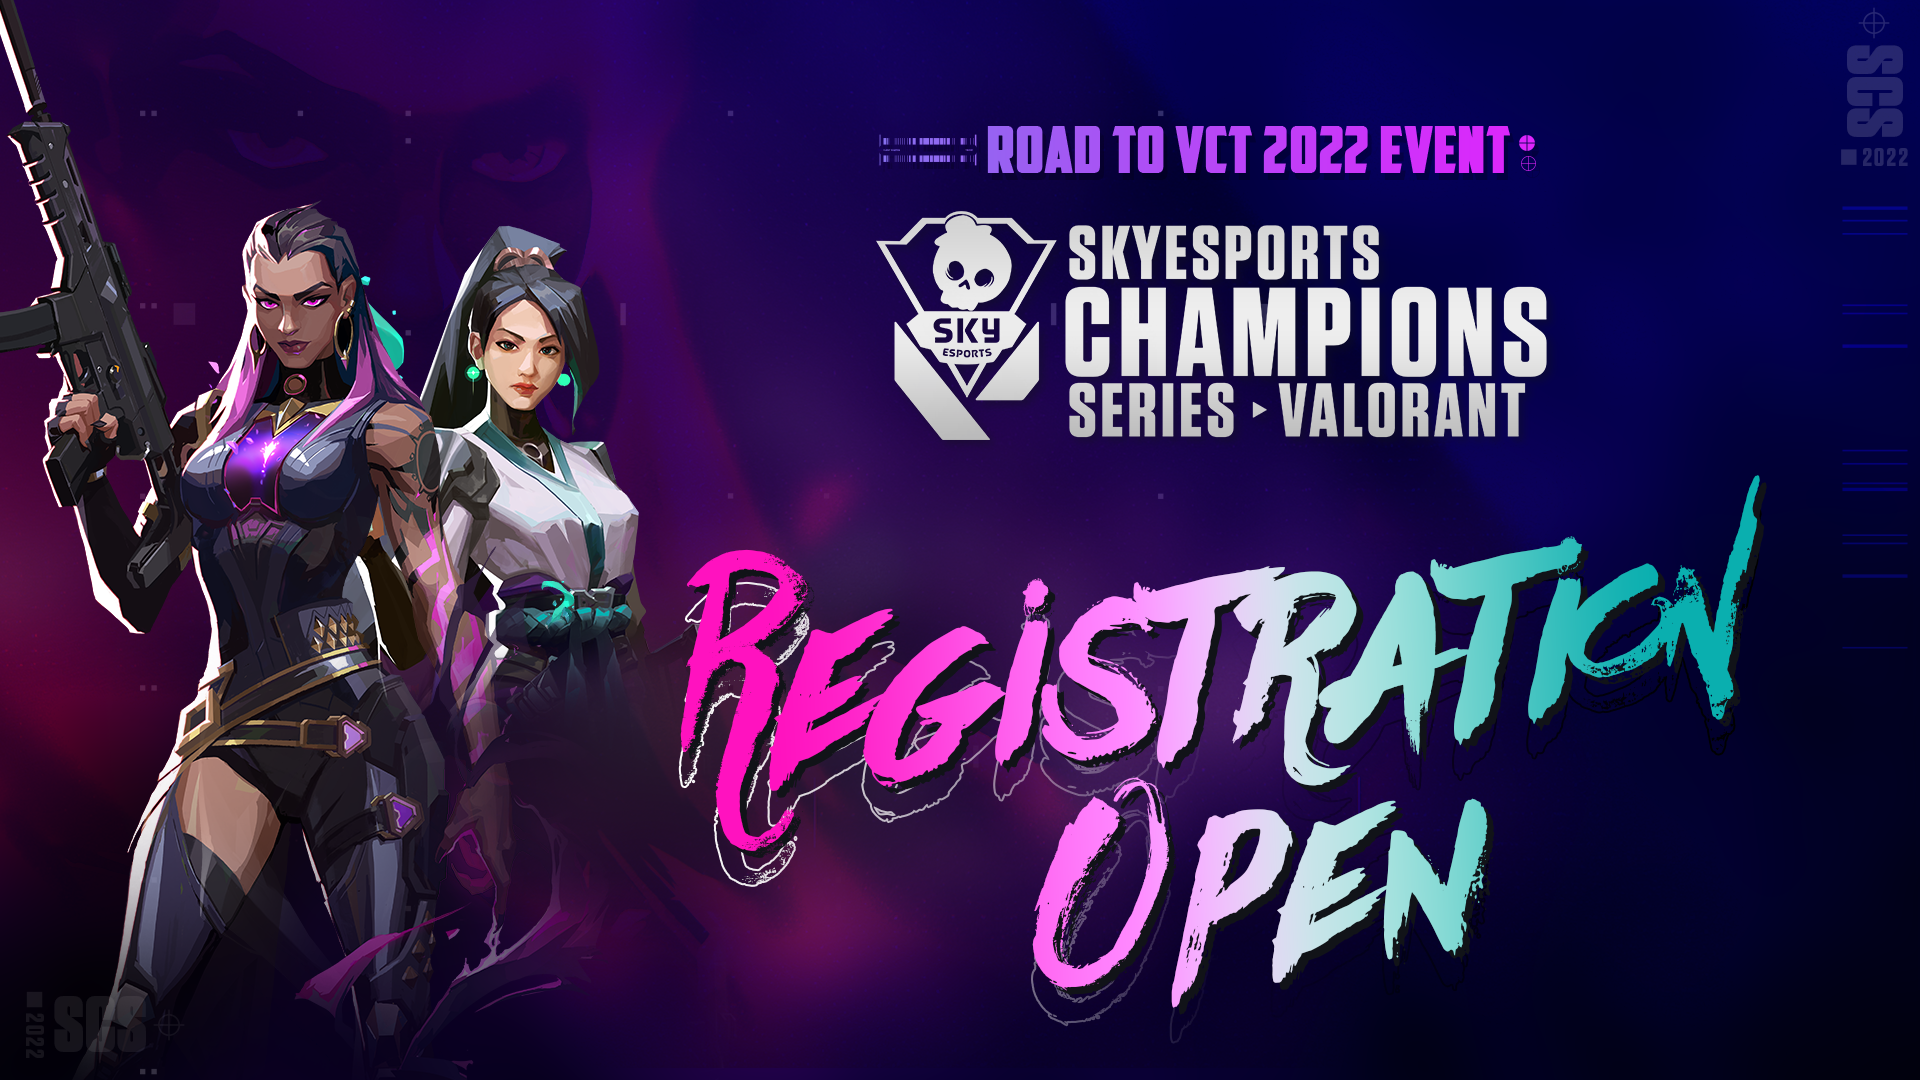 Skyesports and Riot Games announce the South Asia Qualifiers into the APAC VCT Challengers Stage 2: Skyesports Champions Series (SCS) 2022